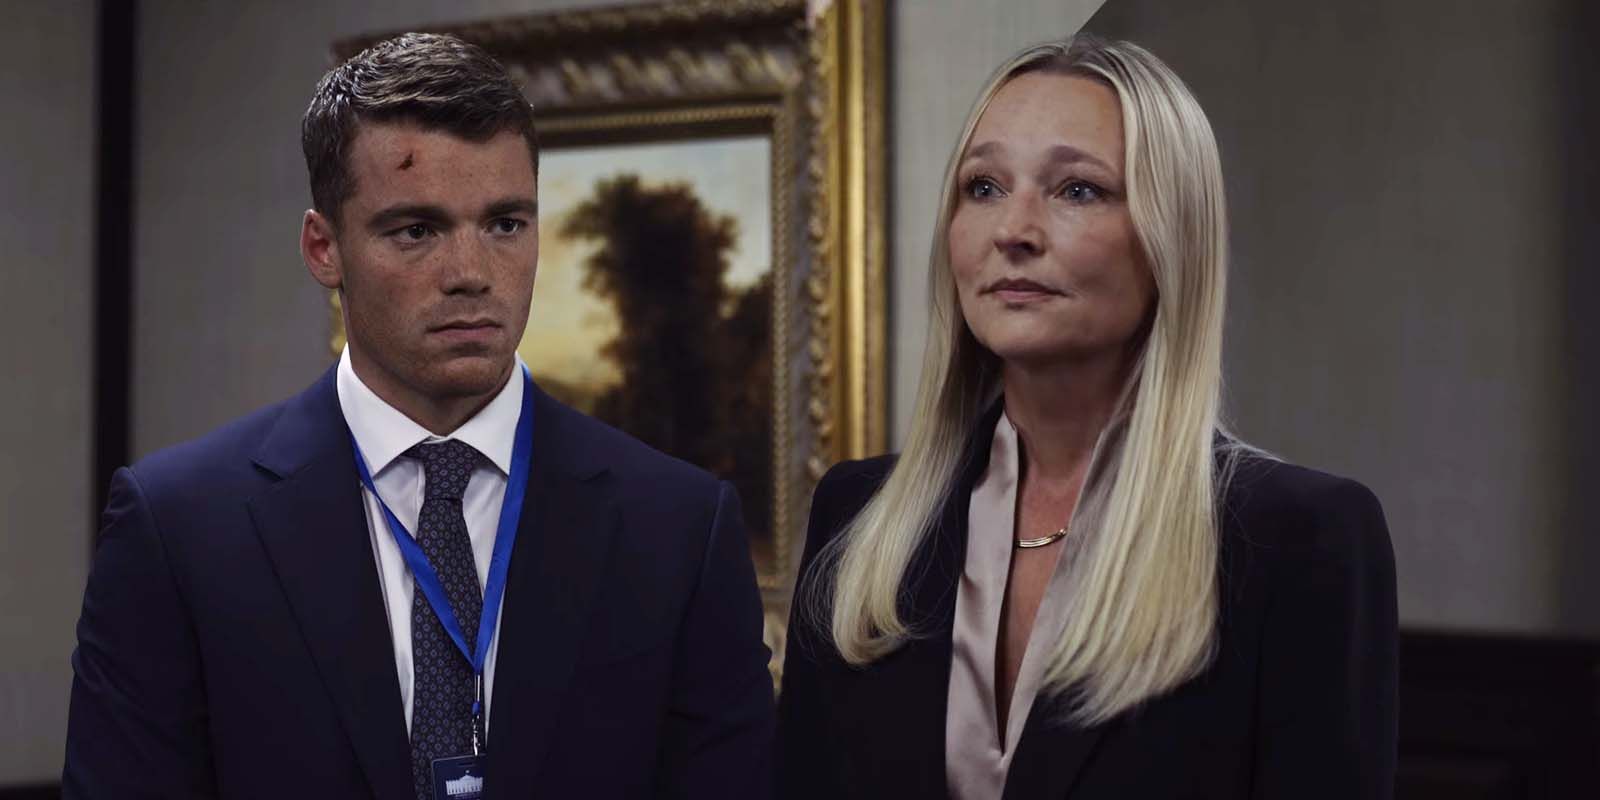 Gabriel Basso as Peter Sutherland and Kari Matchett as President Travers in The Night Agent season 1 episode 10